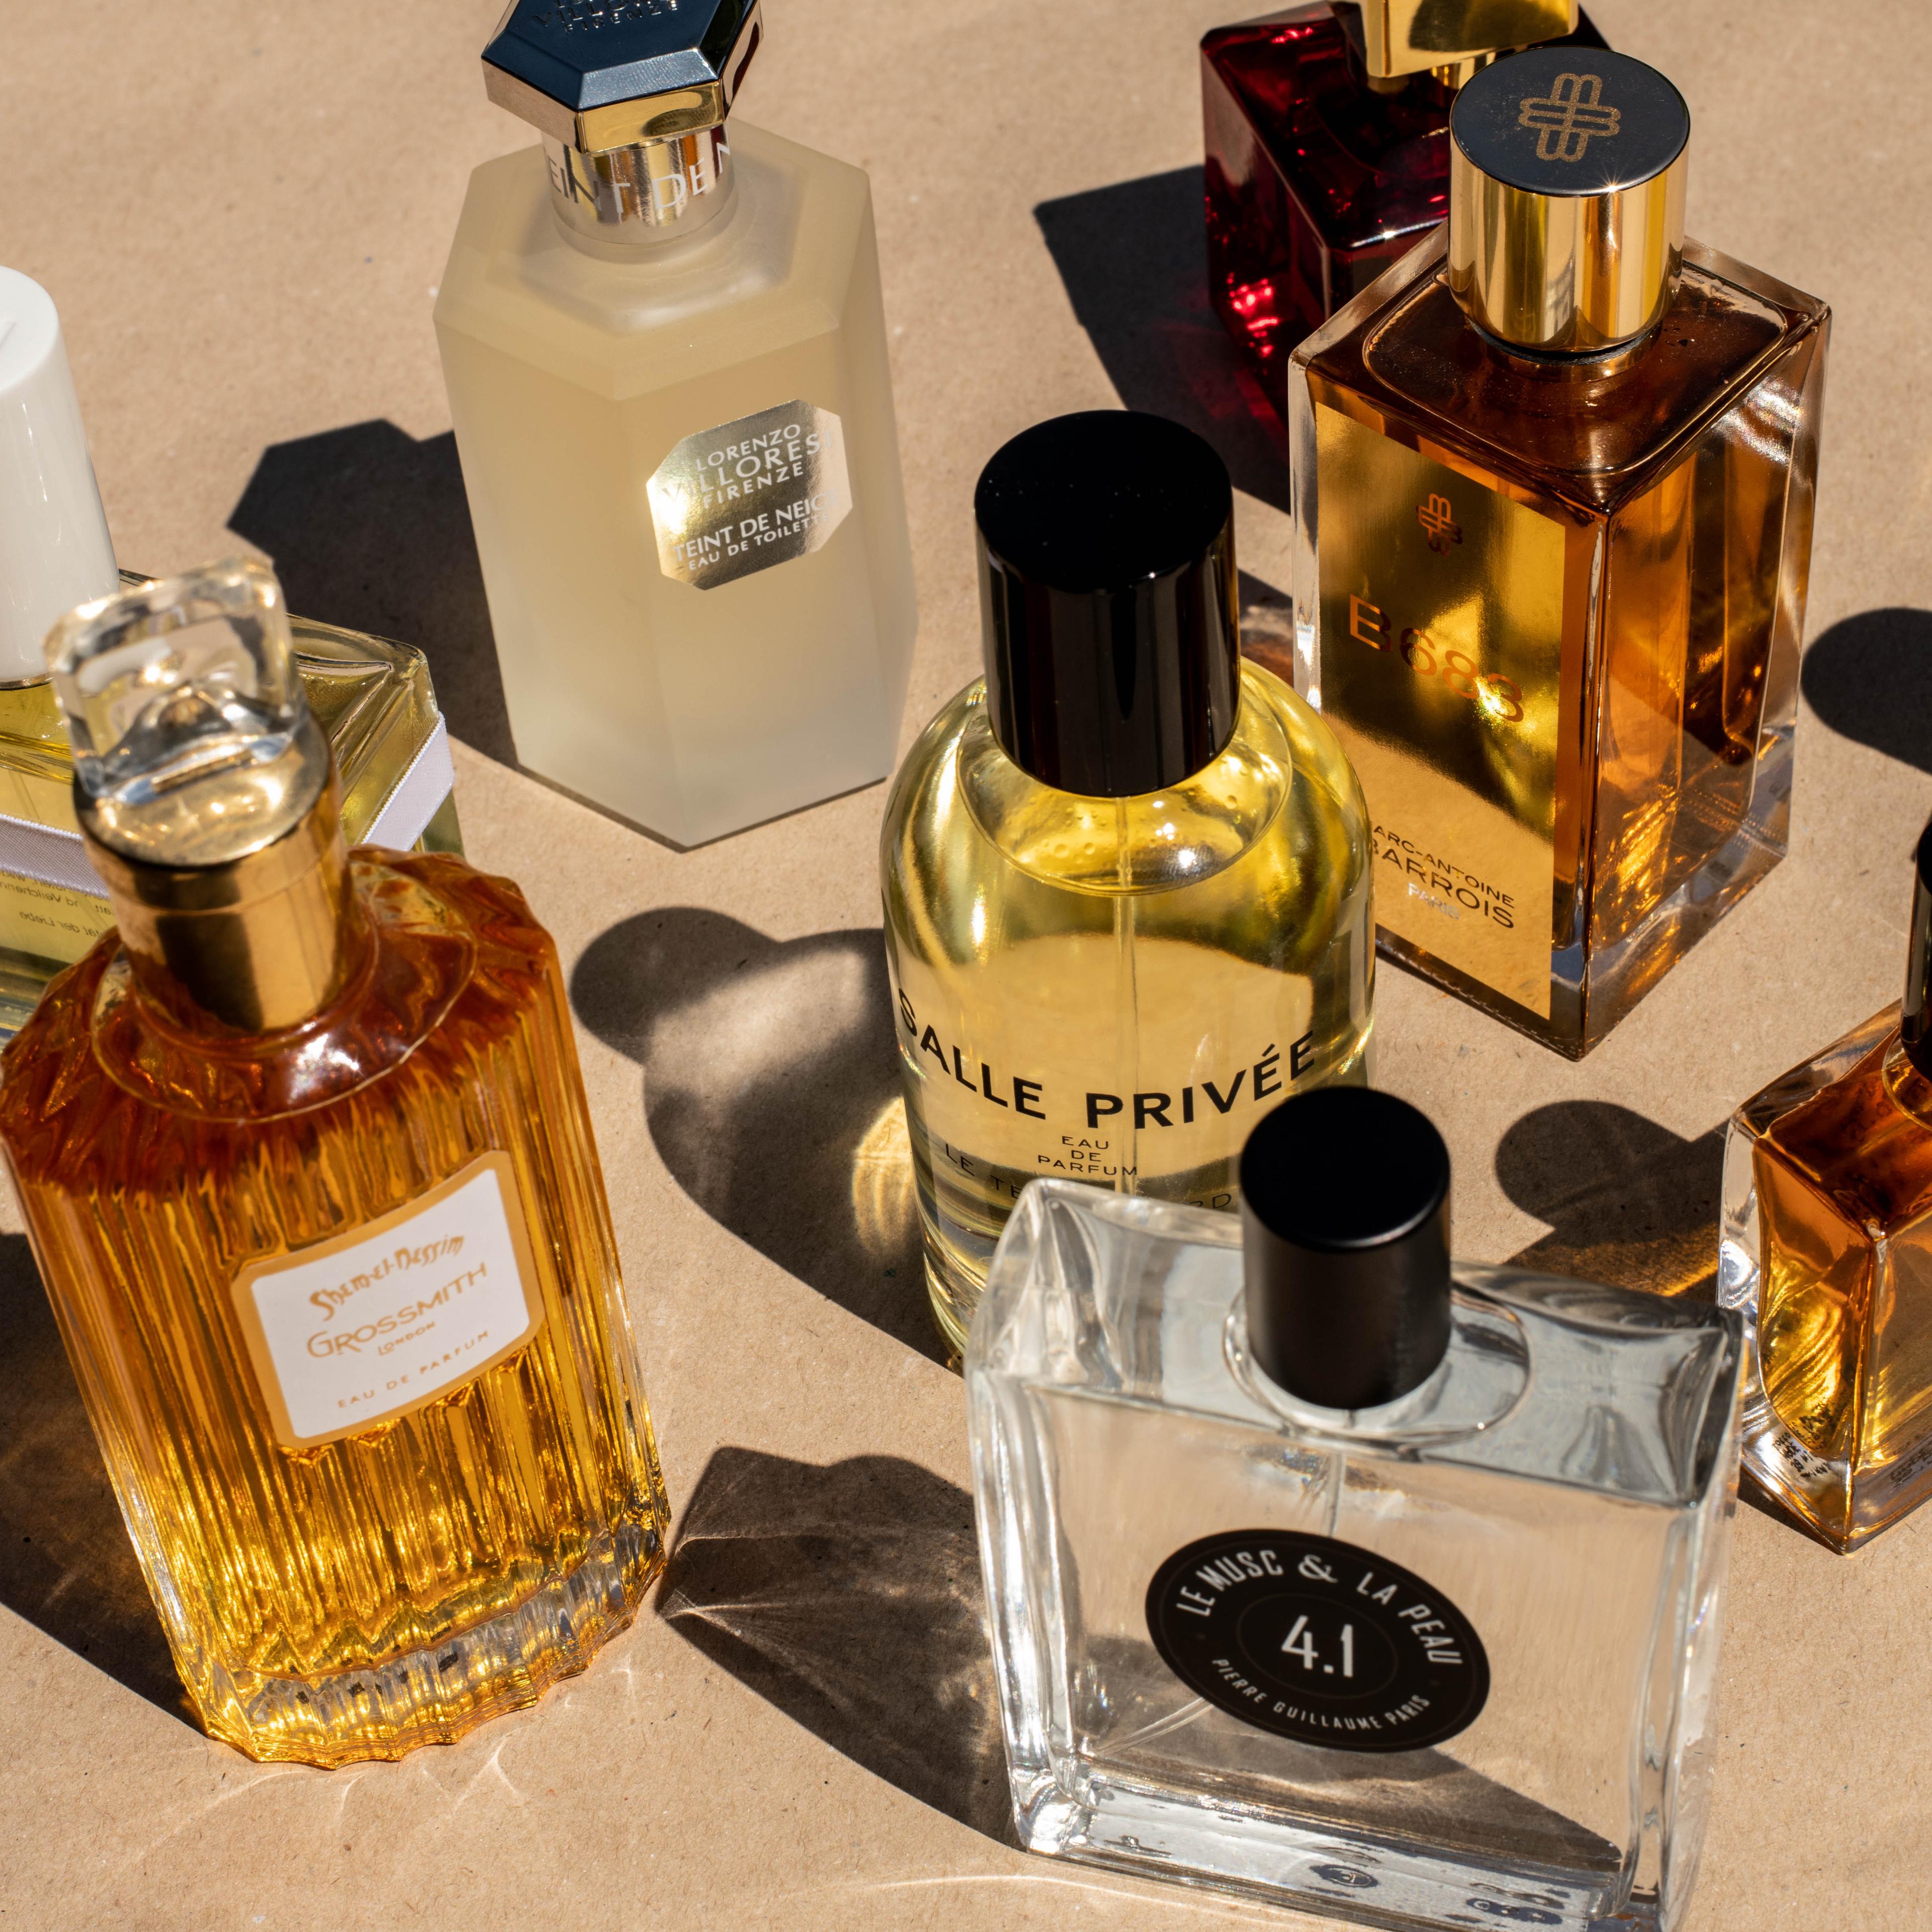 Scent Decant - Perfume Samples & Cologne Samples Starting at 99¢